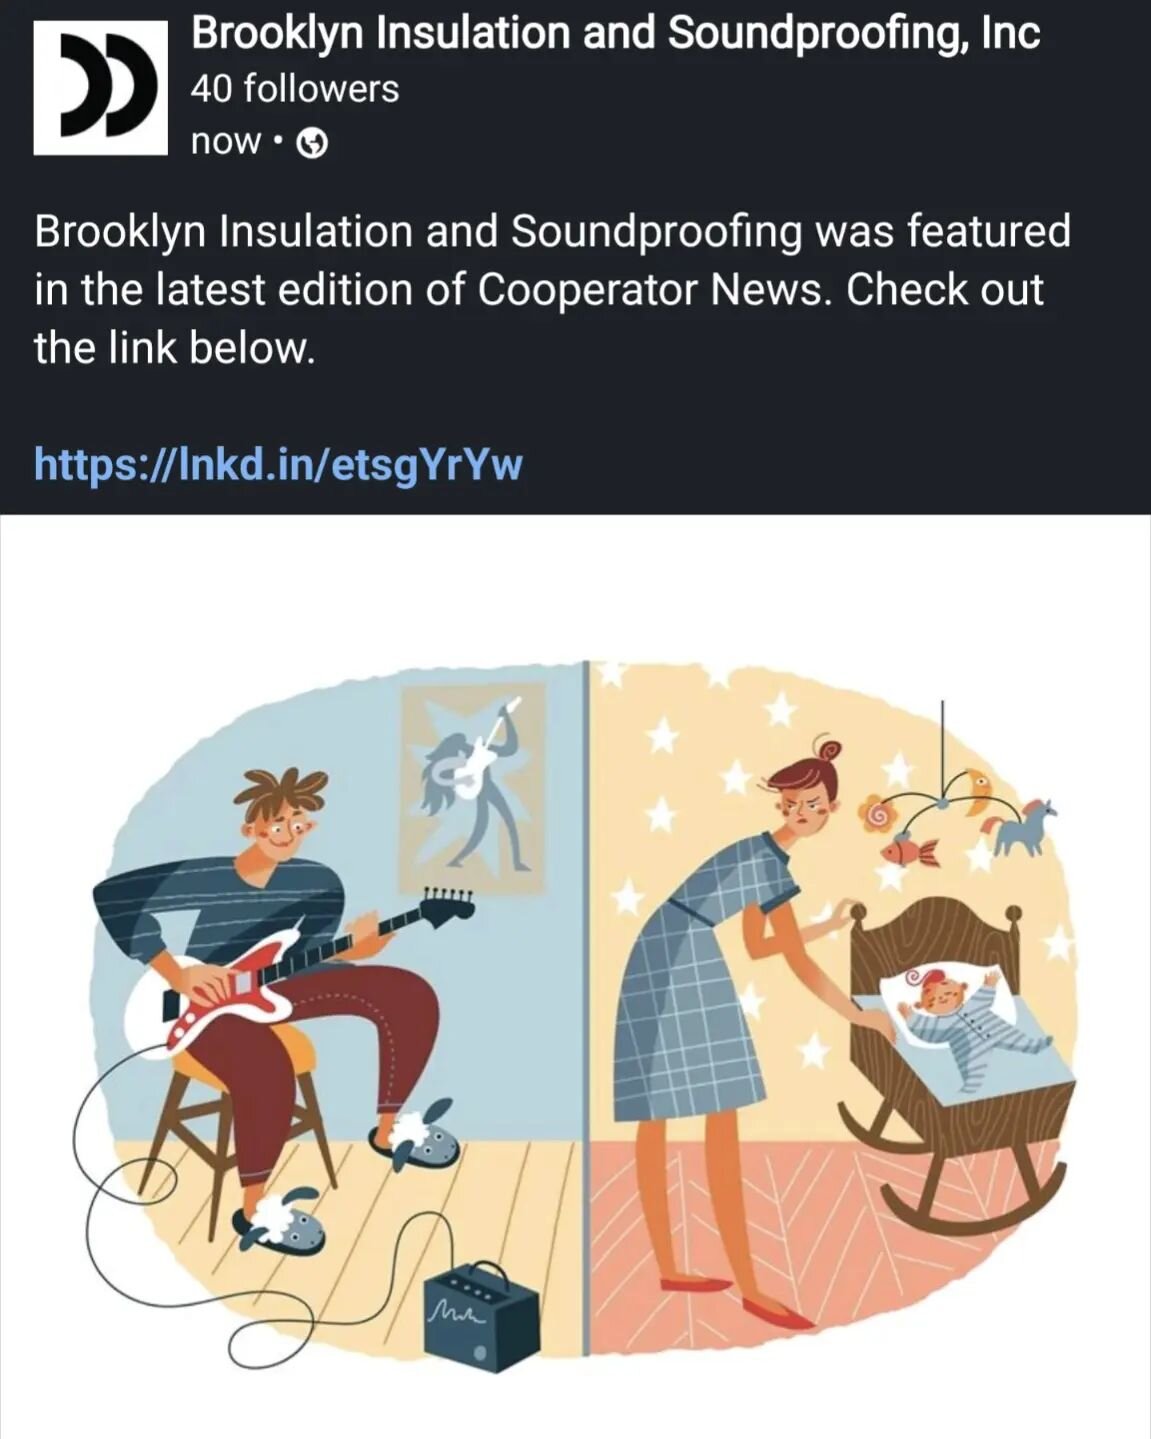 Brooklyn Insulation and Soundproofing was featured in the latest edition of Cooperator News Check out the article in the link below. 

https://cooperatornews.com/article/soundproofing-2